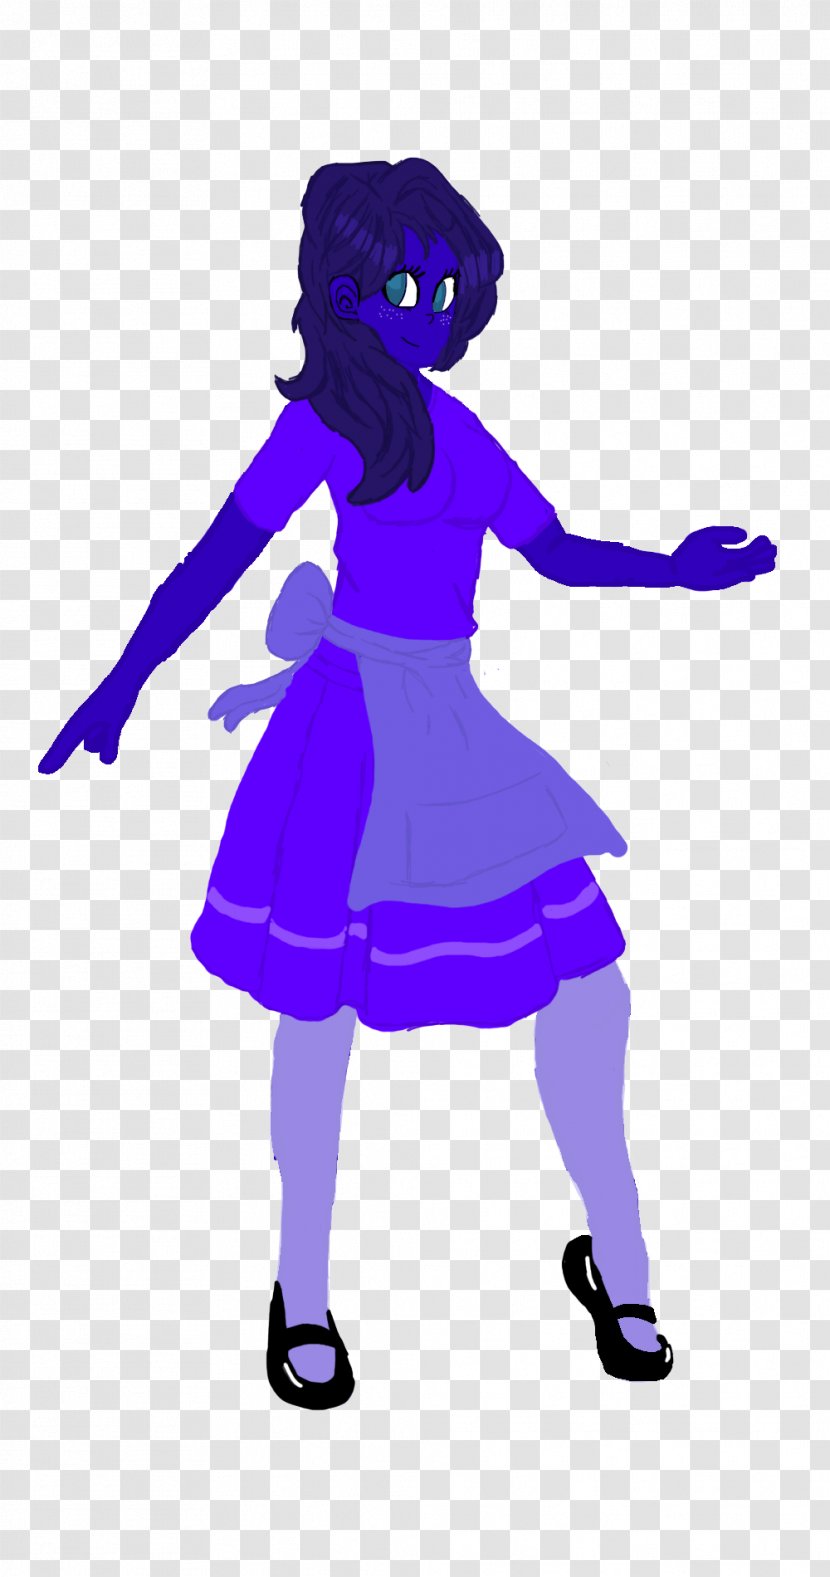 Moonstone Gemstone Costume Silhouette - Clothing Transparent PNG